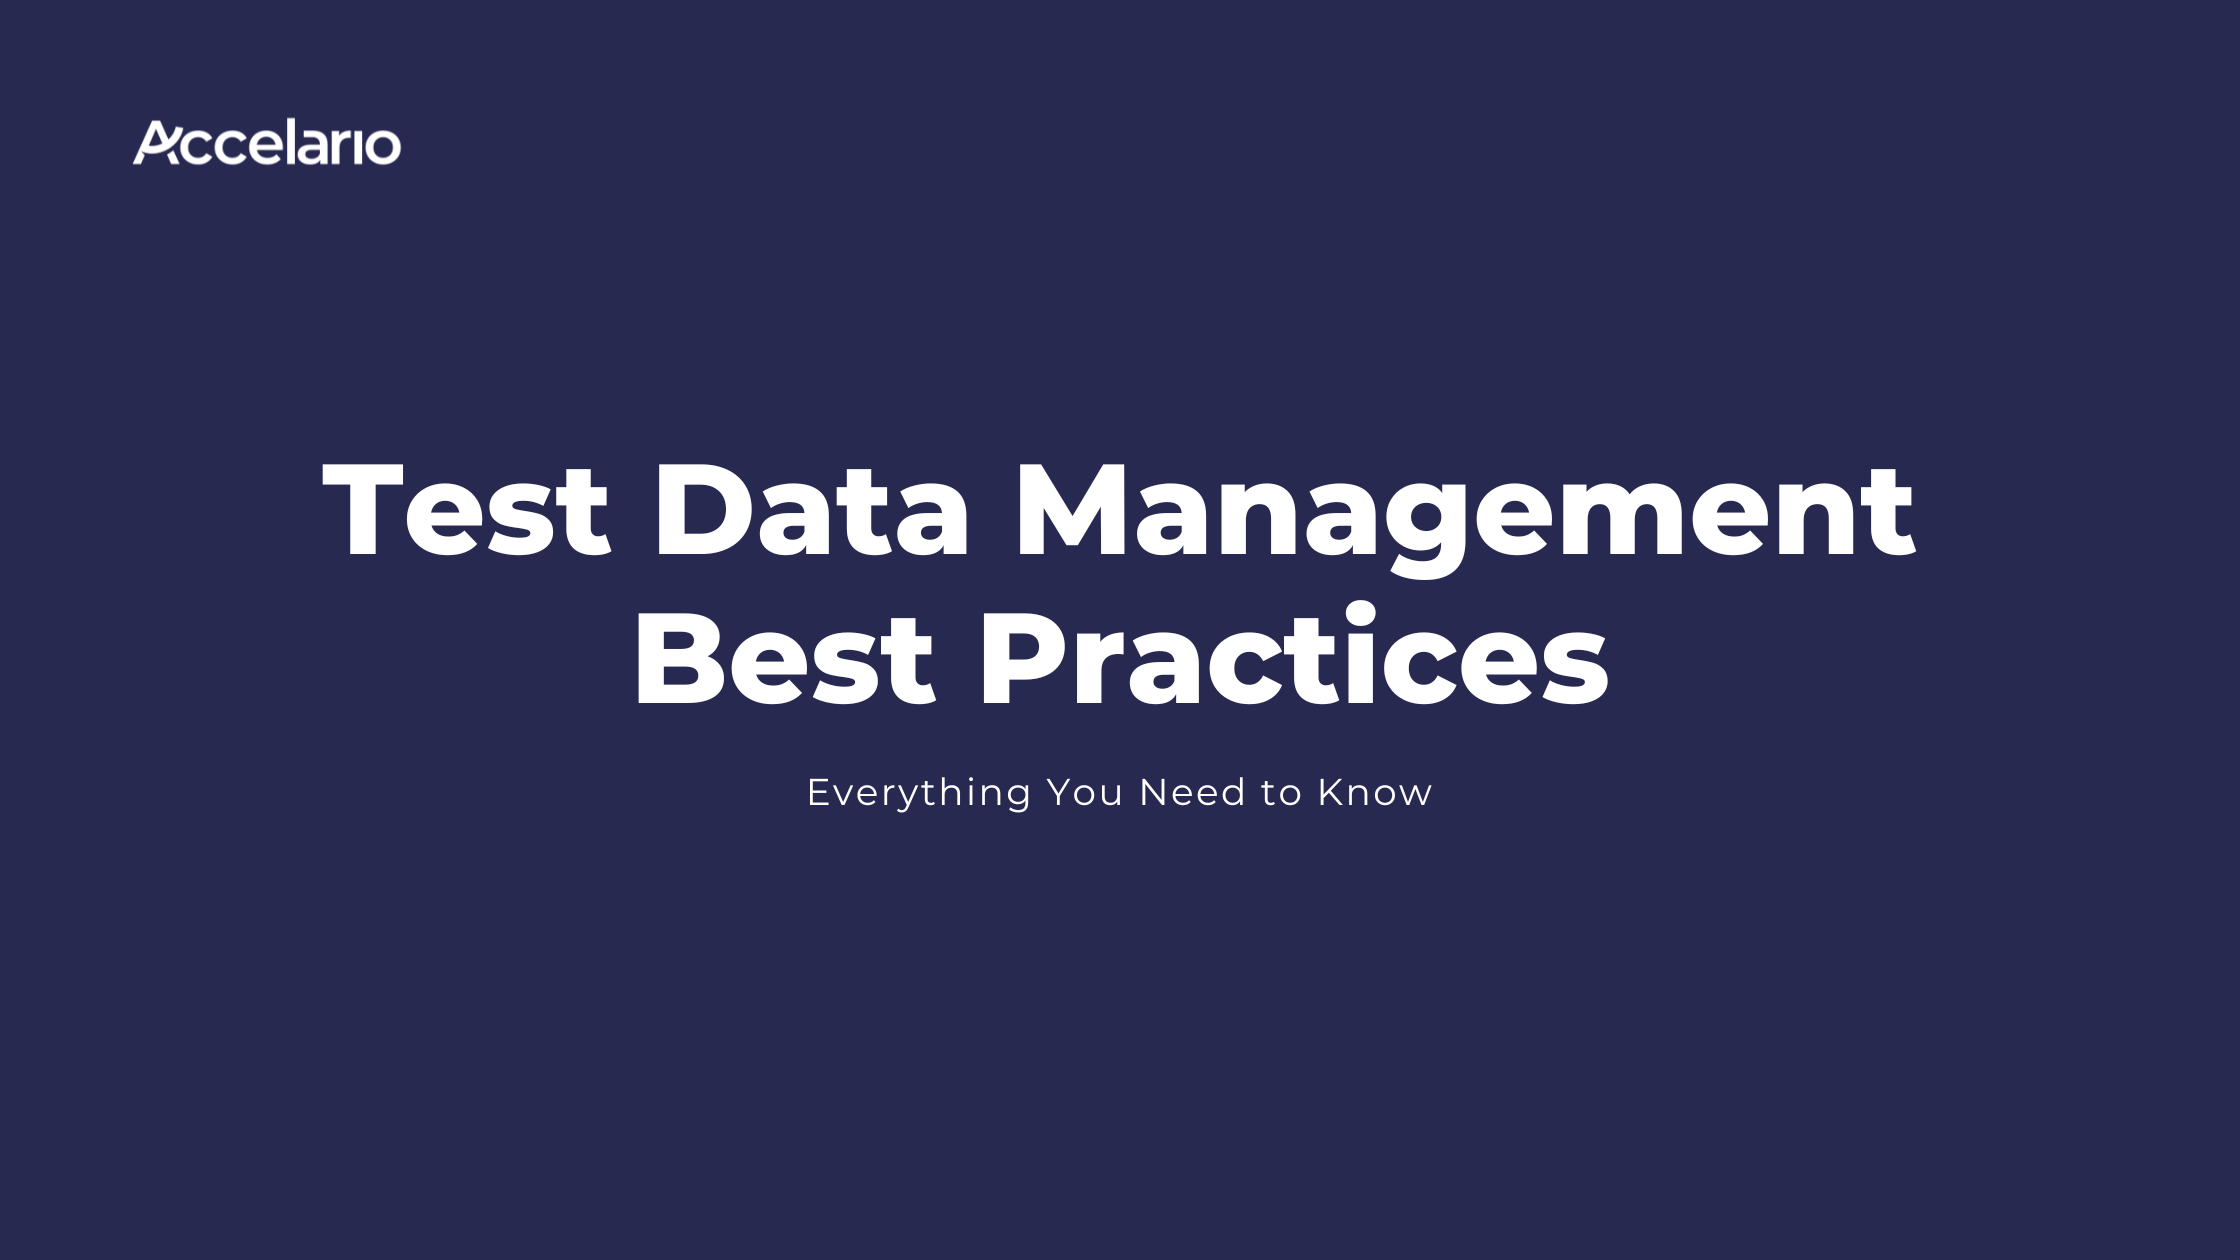 Test Data Management Best Practices: Everything You Need to Know